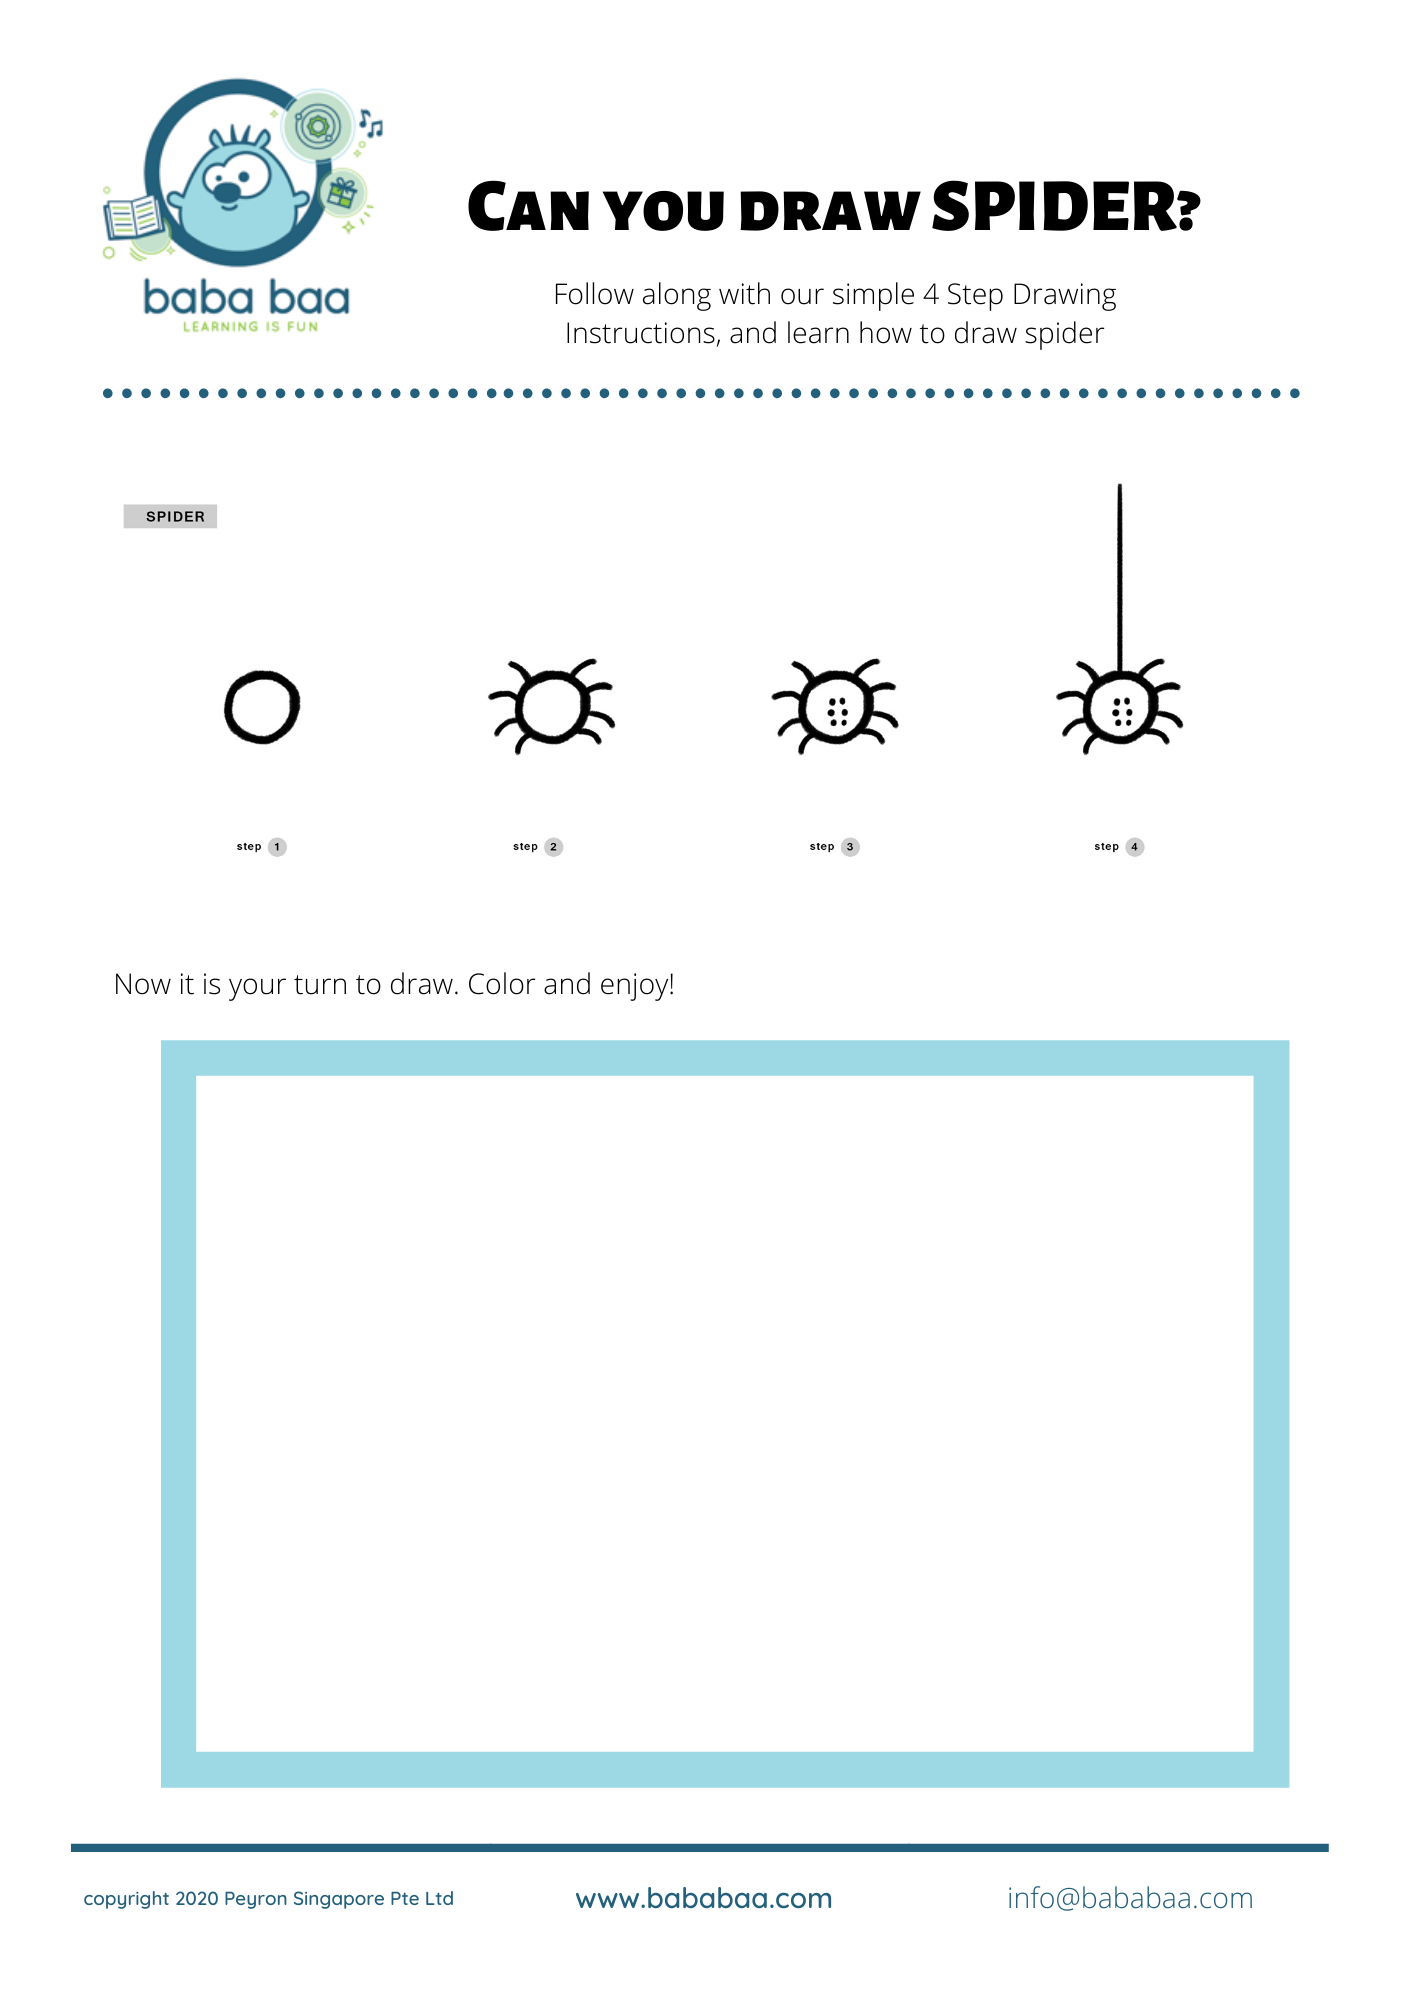 Follow along with our simple step by step drawing instructions, and learn how to draw butterfly.